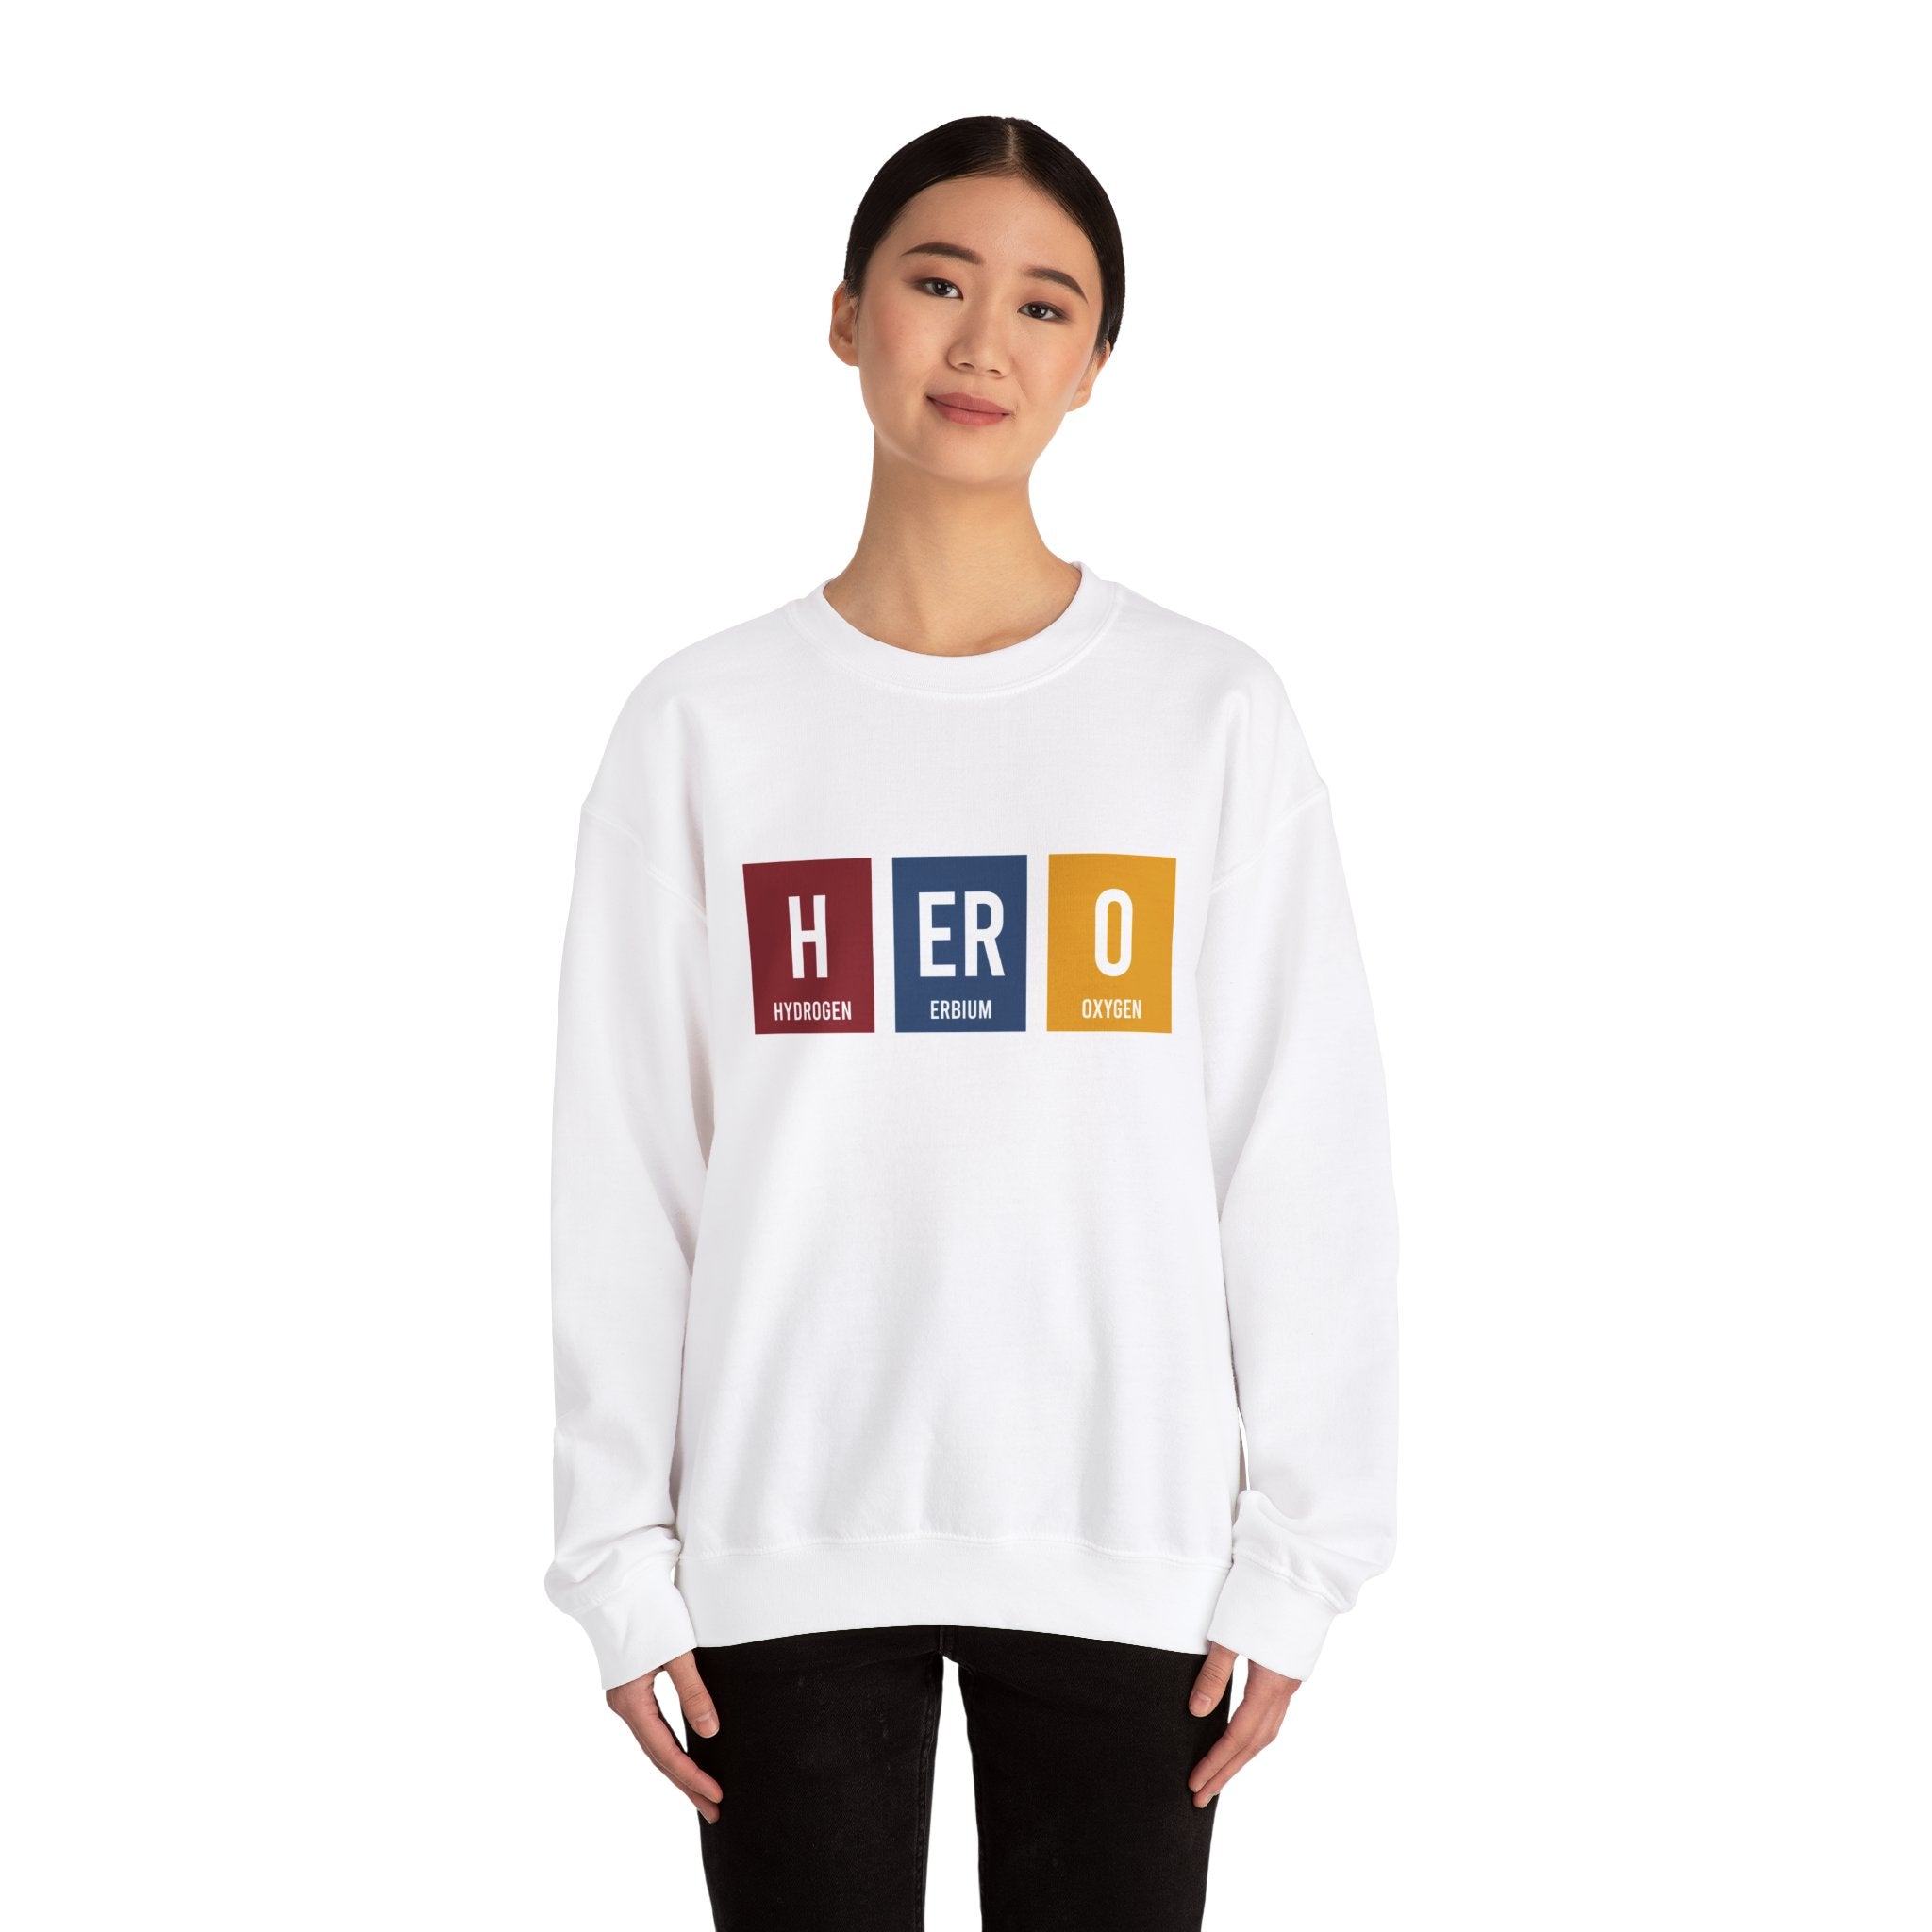 Person wearing a HERO - Sweatshirt that perfectly balances comfort and style, with the word "HERO" printed in colorful blocks, each representing an element from the periodic table: Hydrogen, Erbium, and Oxygen. Ideal for making winters warmer with a touch of geeky flair.